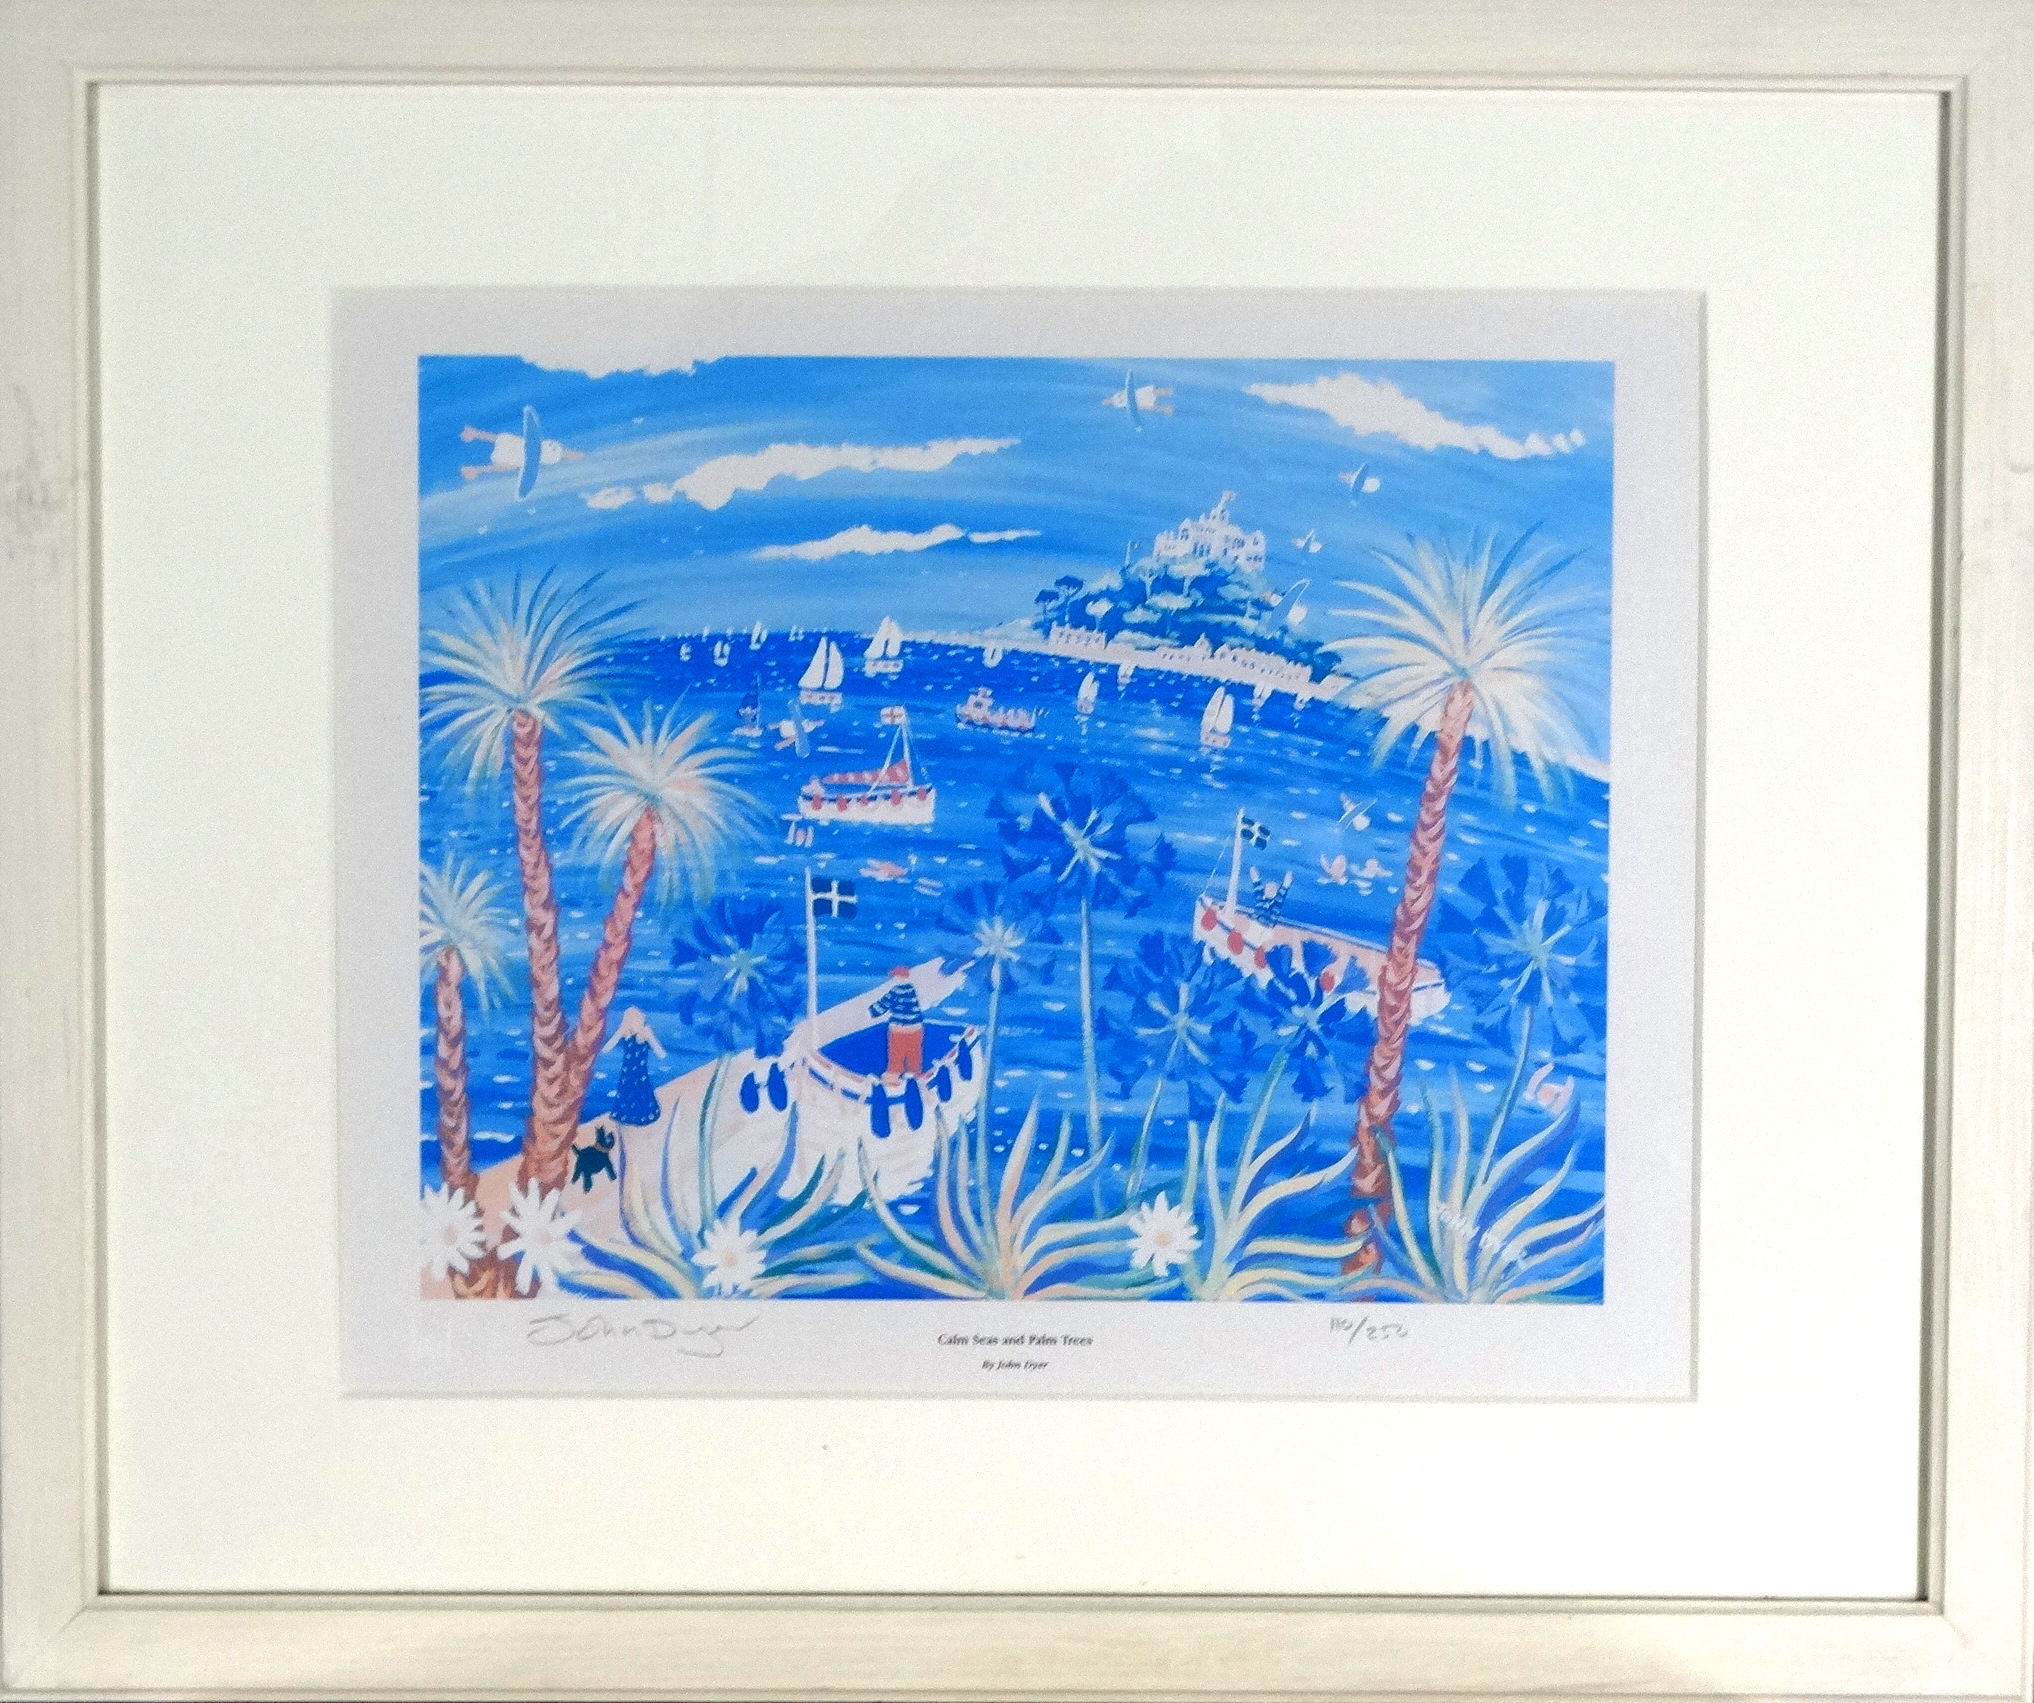 # John DYER (British b.1968) Island Life Lithograph Signed and numbered 62/250 Framed and glazed - Image 3 of 8